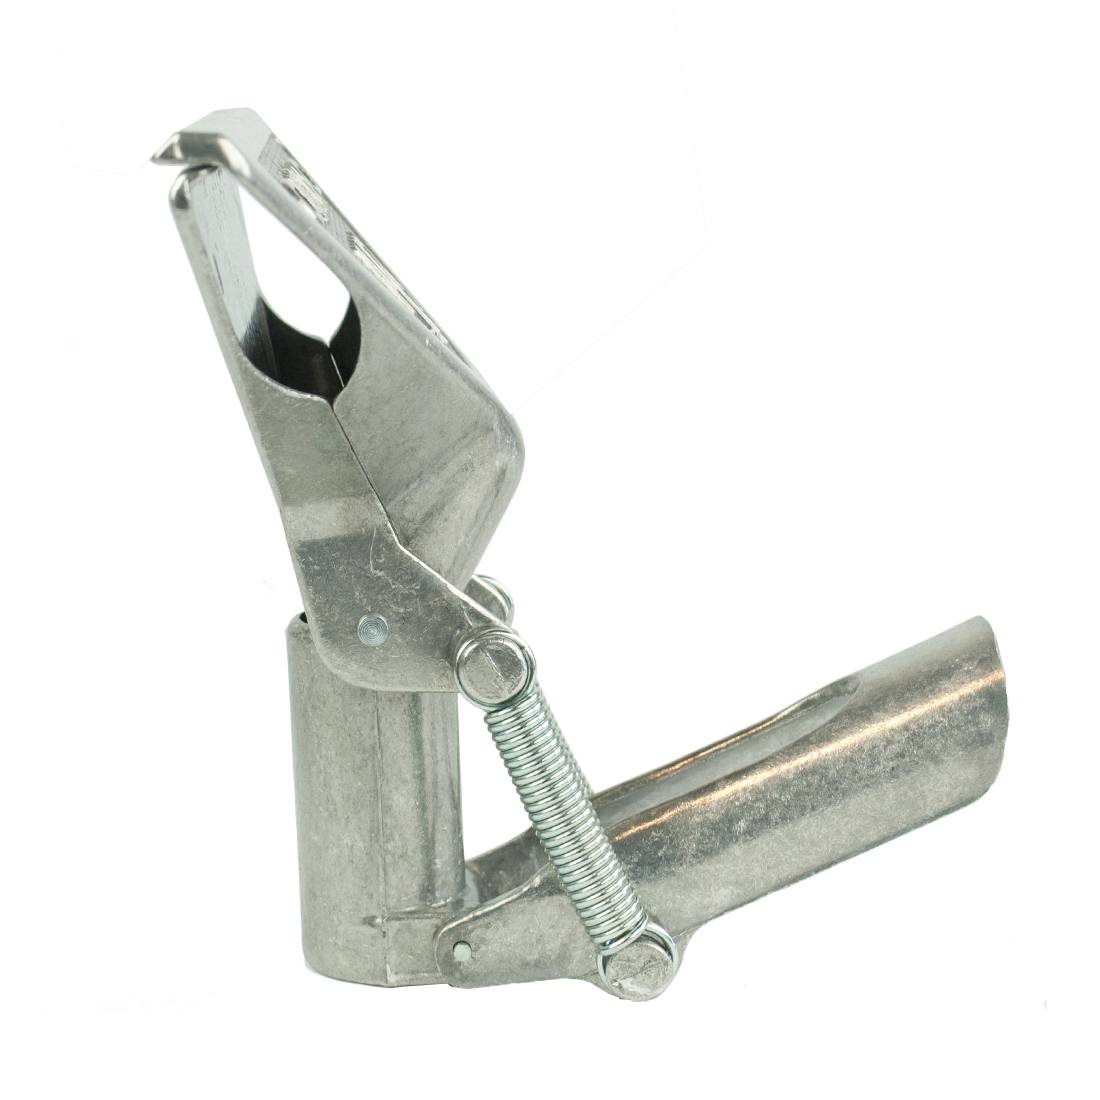 Pulex Multipurpose Clamp for Pole - Folded Right Side View